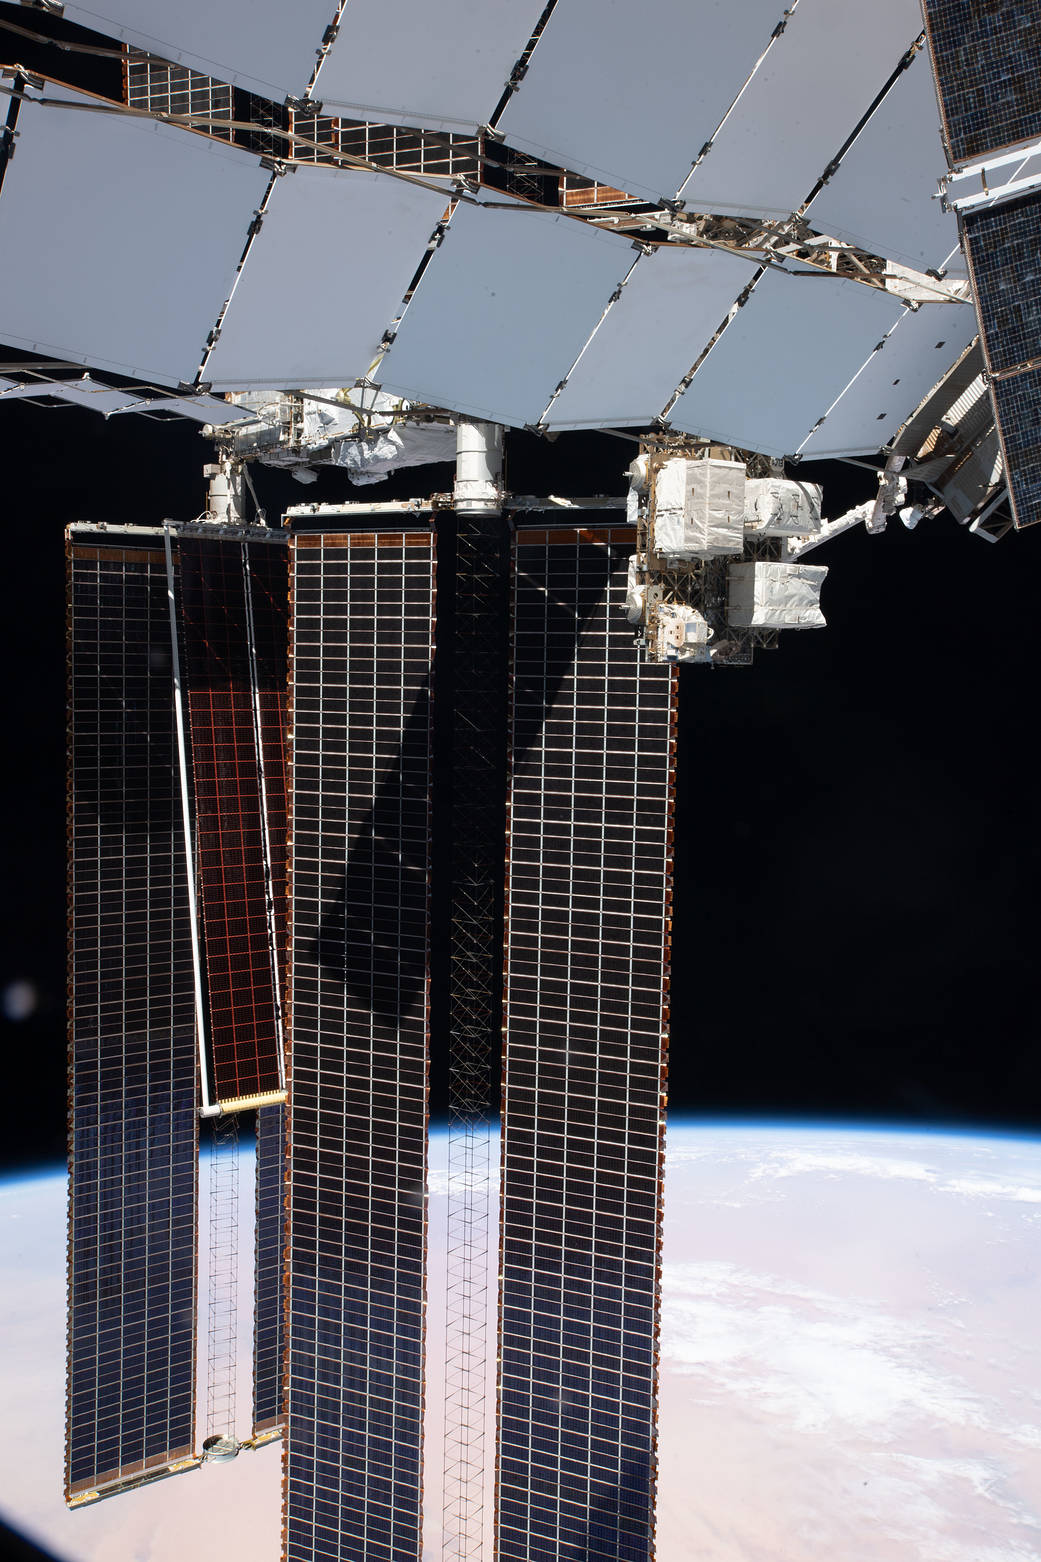 The new ISS Roll-Out Solar Array (iROSA) is deployed